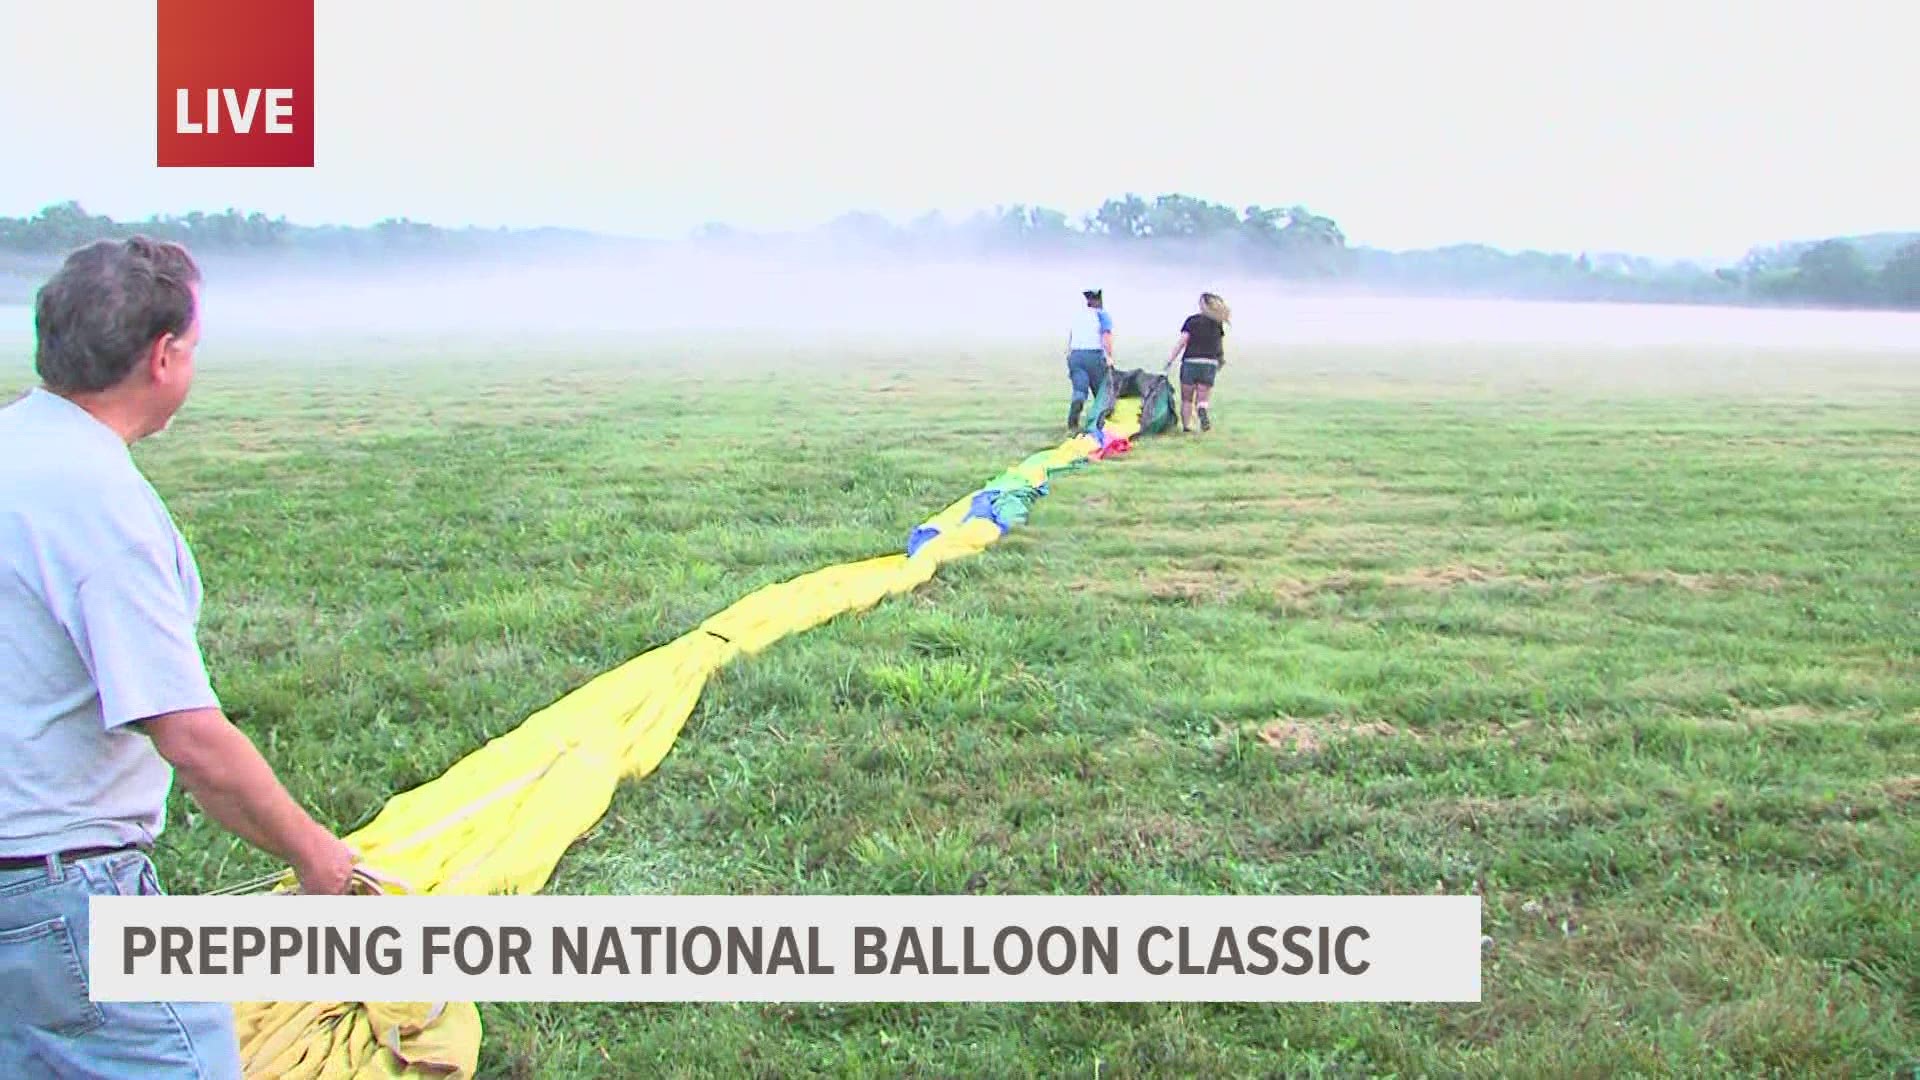 Randy Stone, a hot air balloon pilot, explains what it takes to get a hot air balloon into the sky and what the National Balloon Classic is.